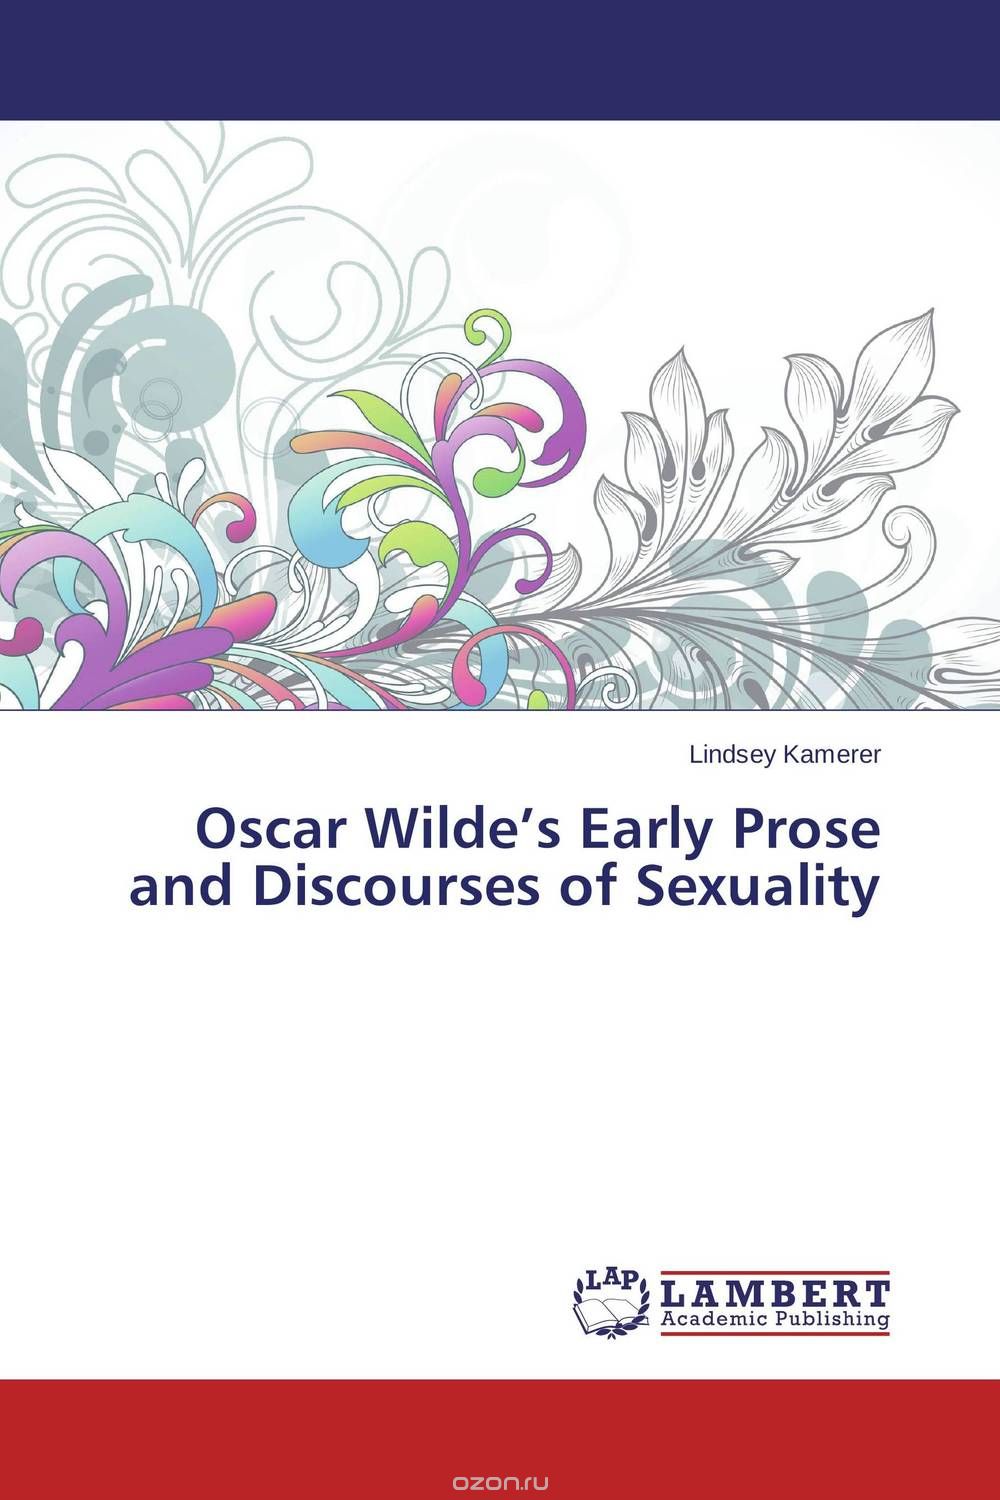 Oscar Wilde’s Early Prose and Discourses of Sexuality